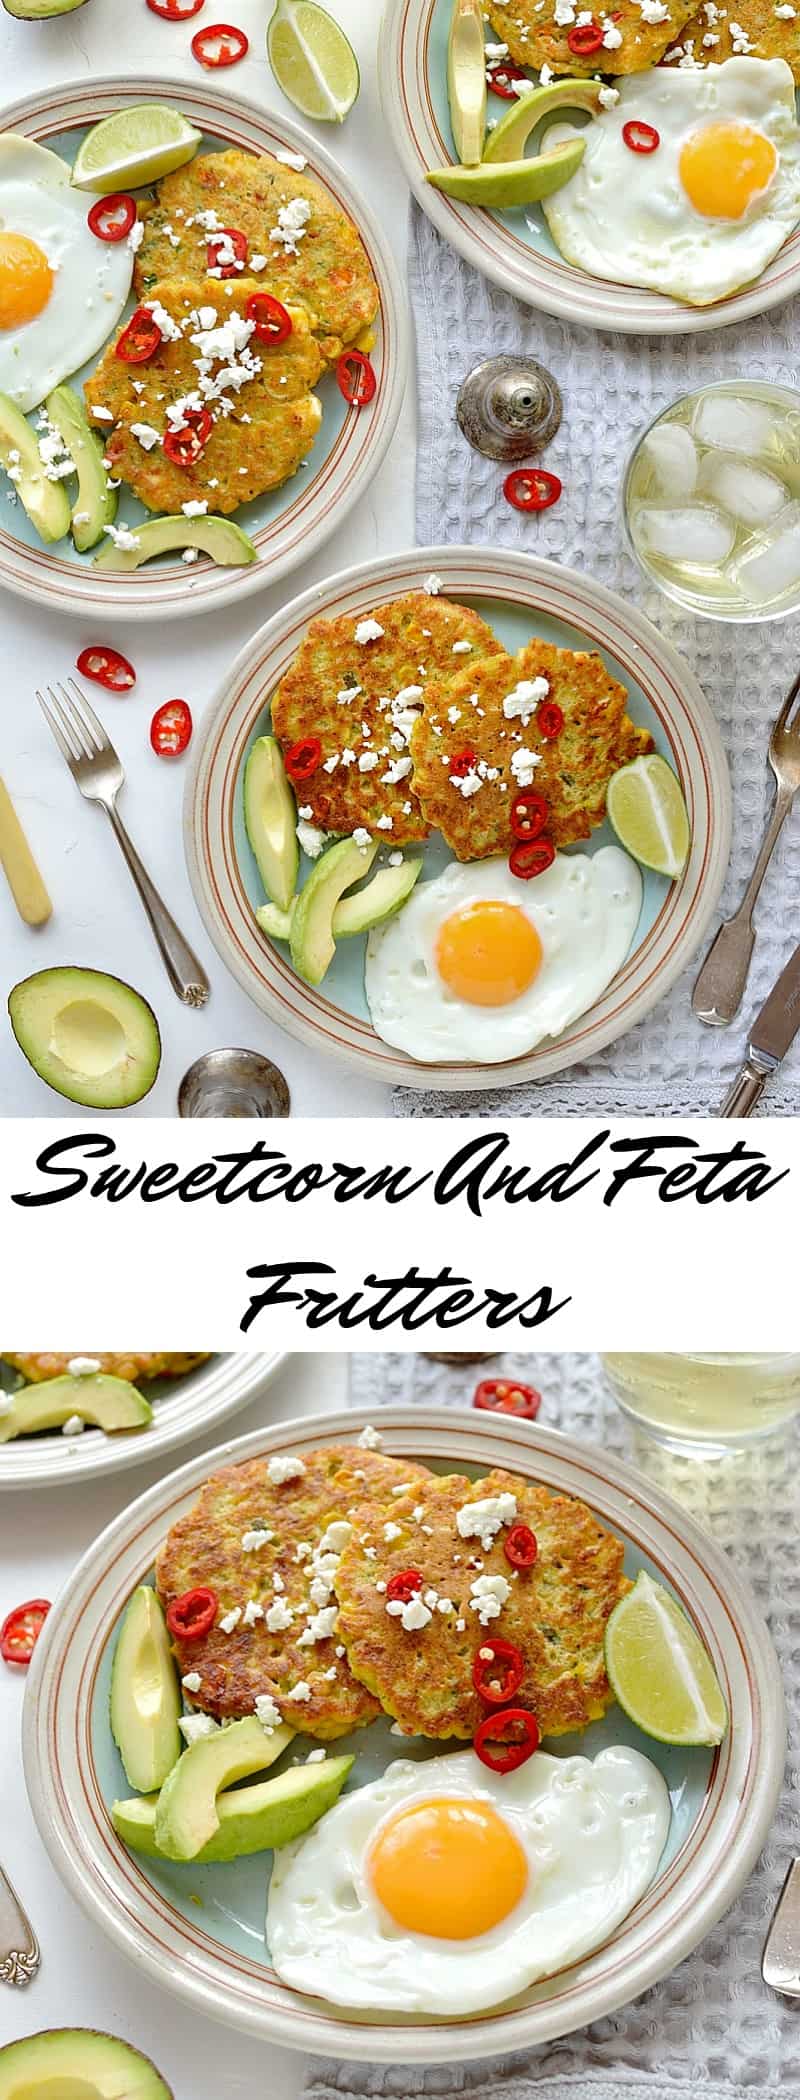 Sweetcorn and feta fritters - a quick and easy meal that everyone will love!